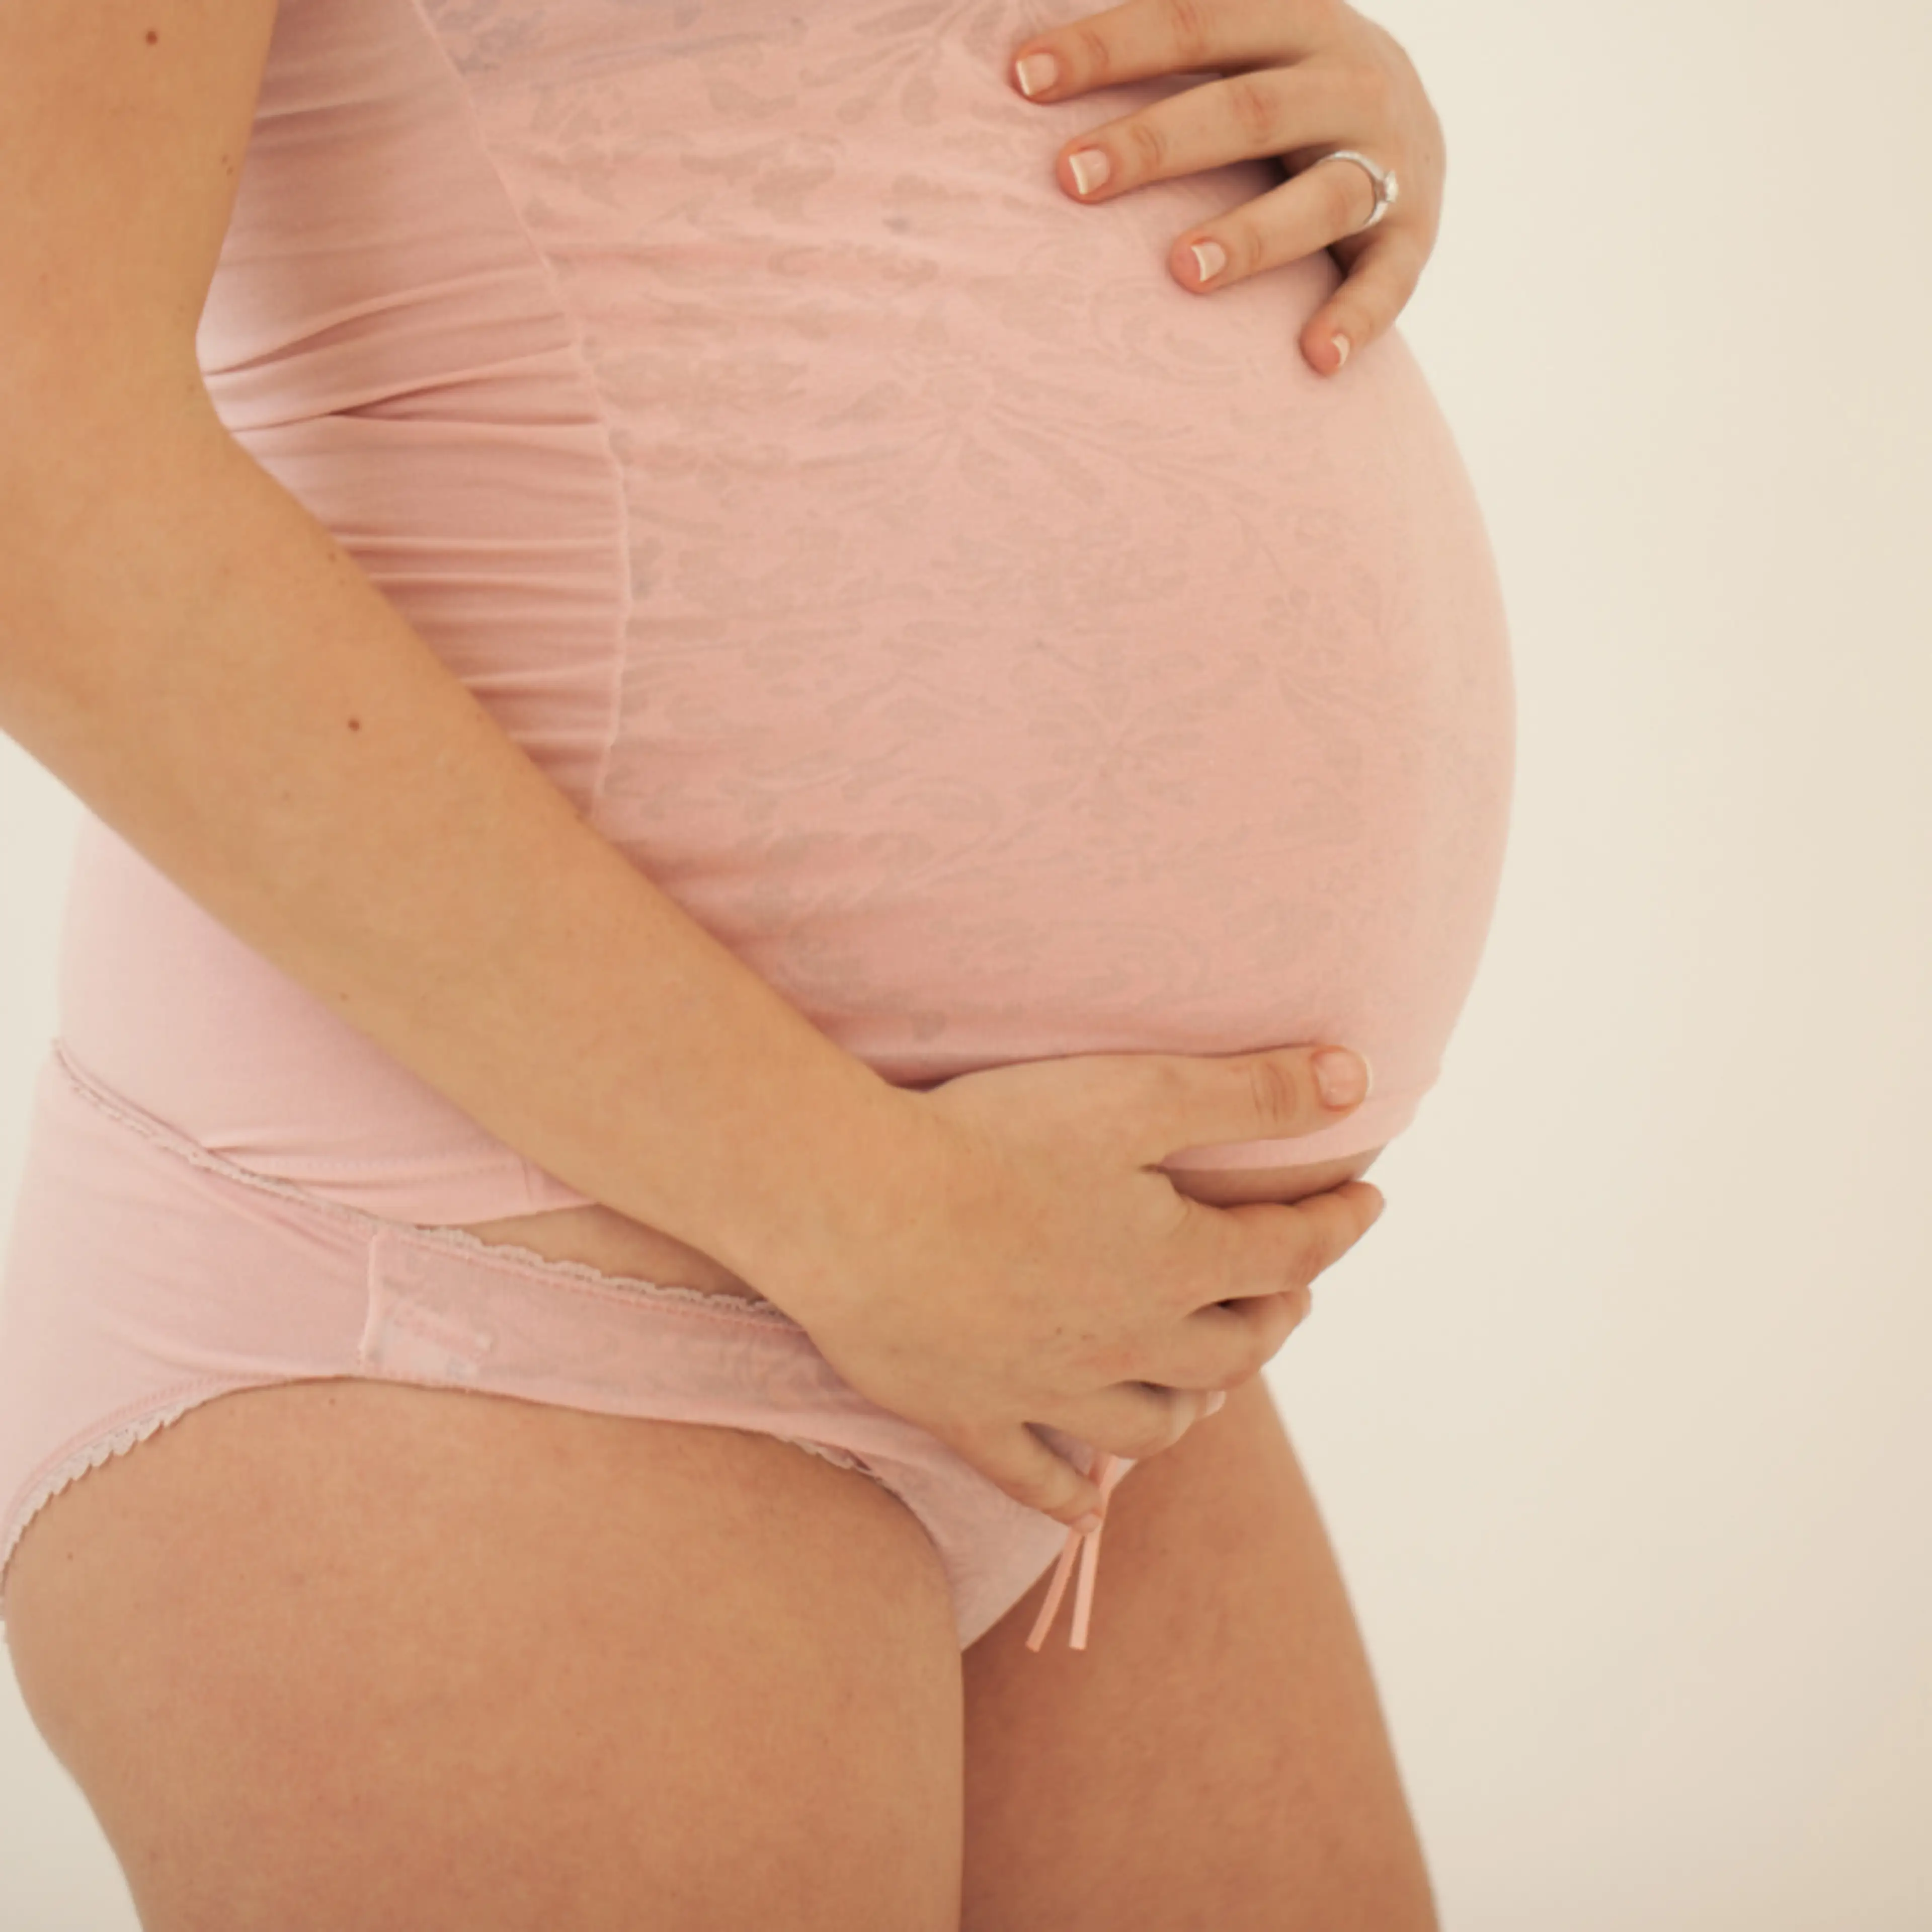 Everything You Need to Know About Hemorrhoids During Pregnancy